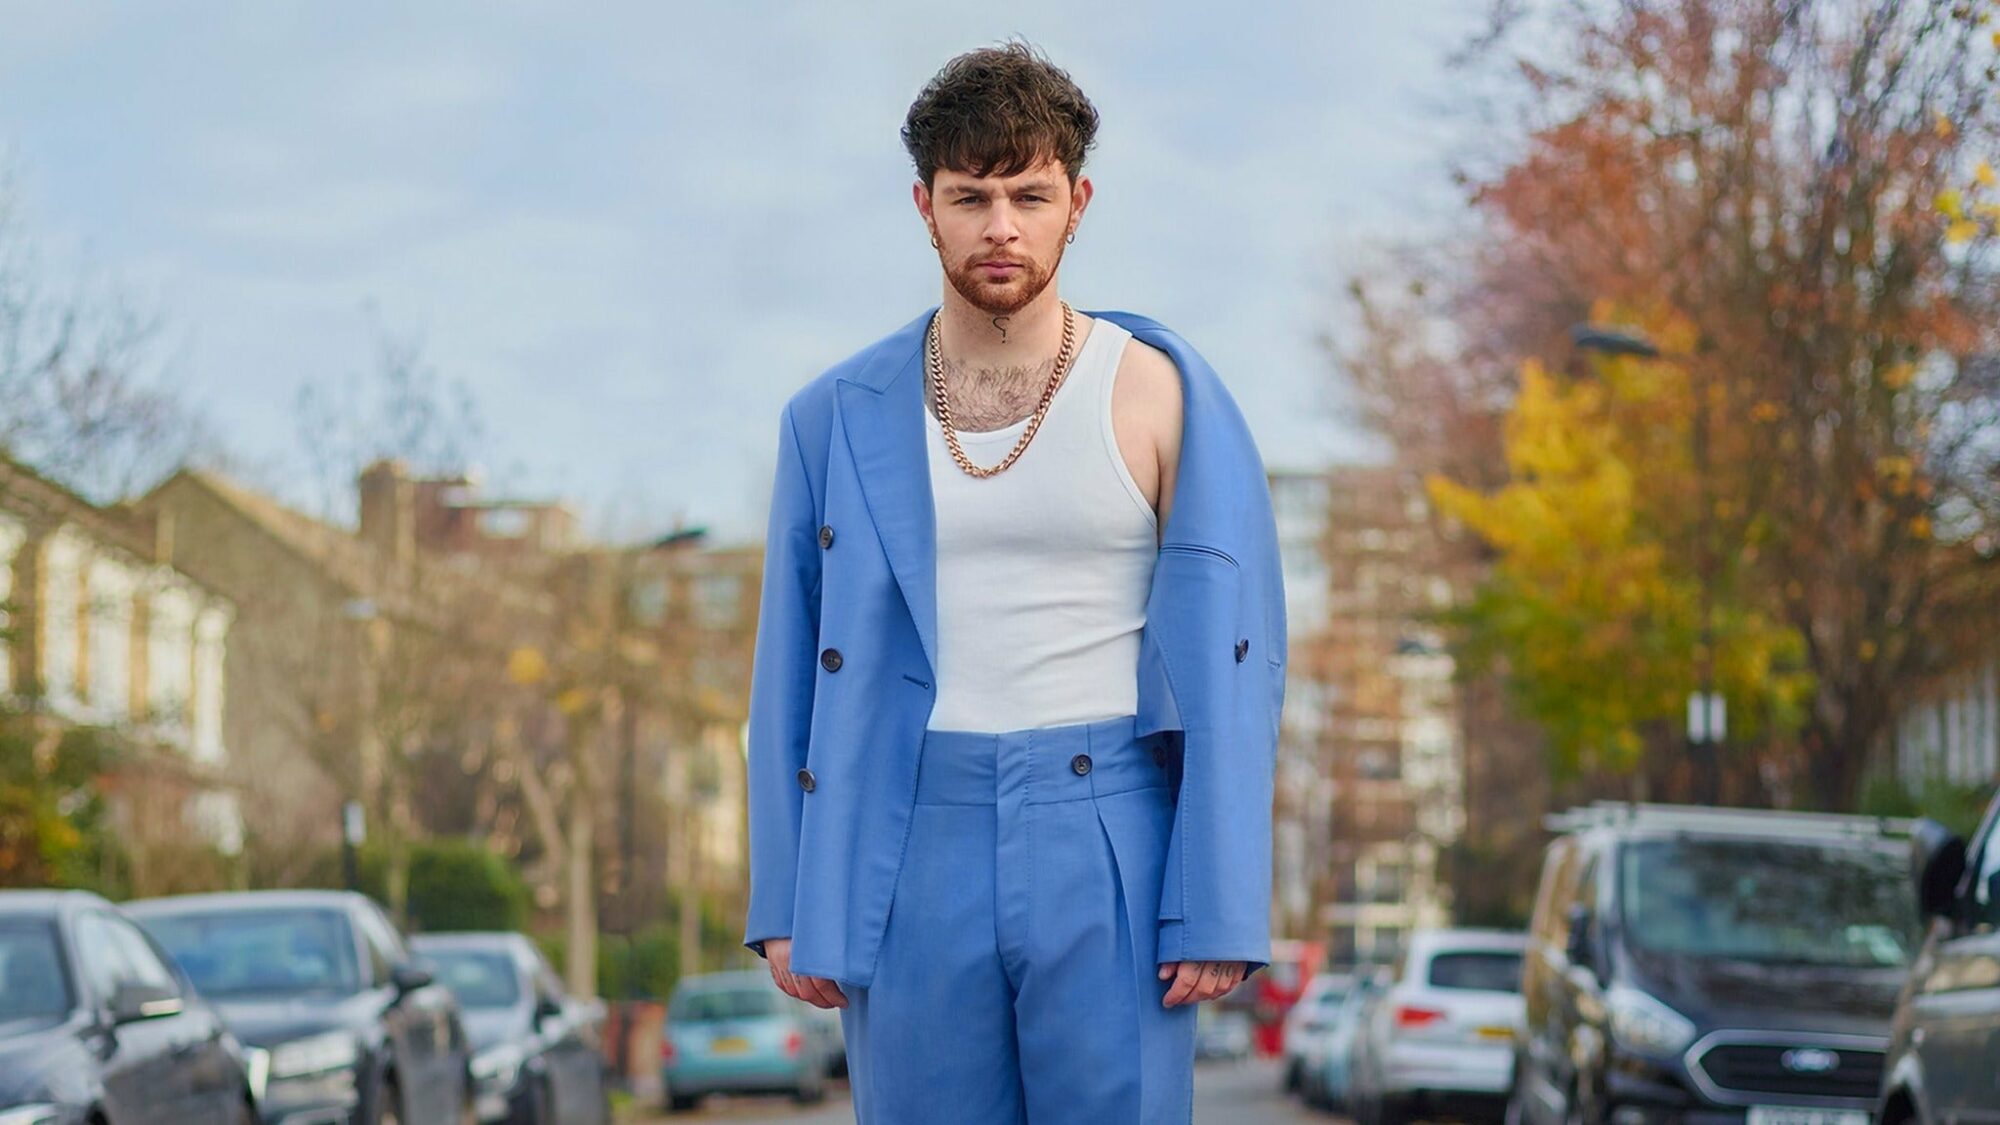 Image name Tom Grennan Official Ticket and Hotel Packages at Scarborough Open Air Theatre Scarborough the 1 image from the post Tom Grennan - Official Ticket and Hotel Packages at Scarborough Open Air Theatre, Scarborough in Yorkshire.com.